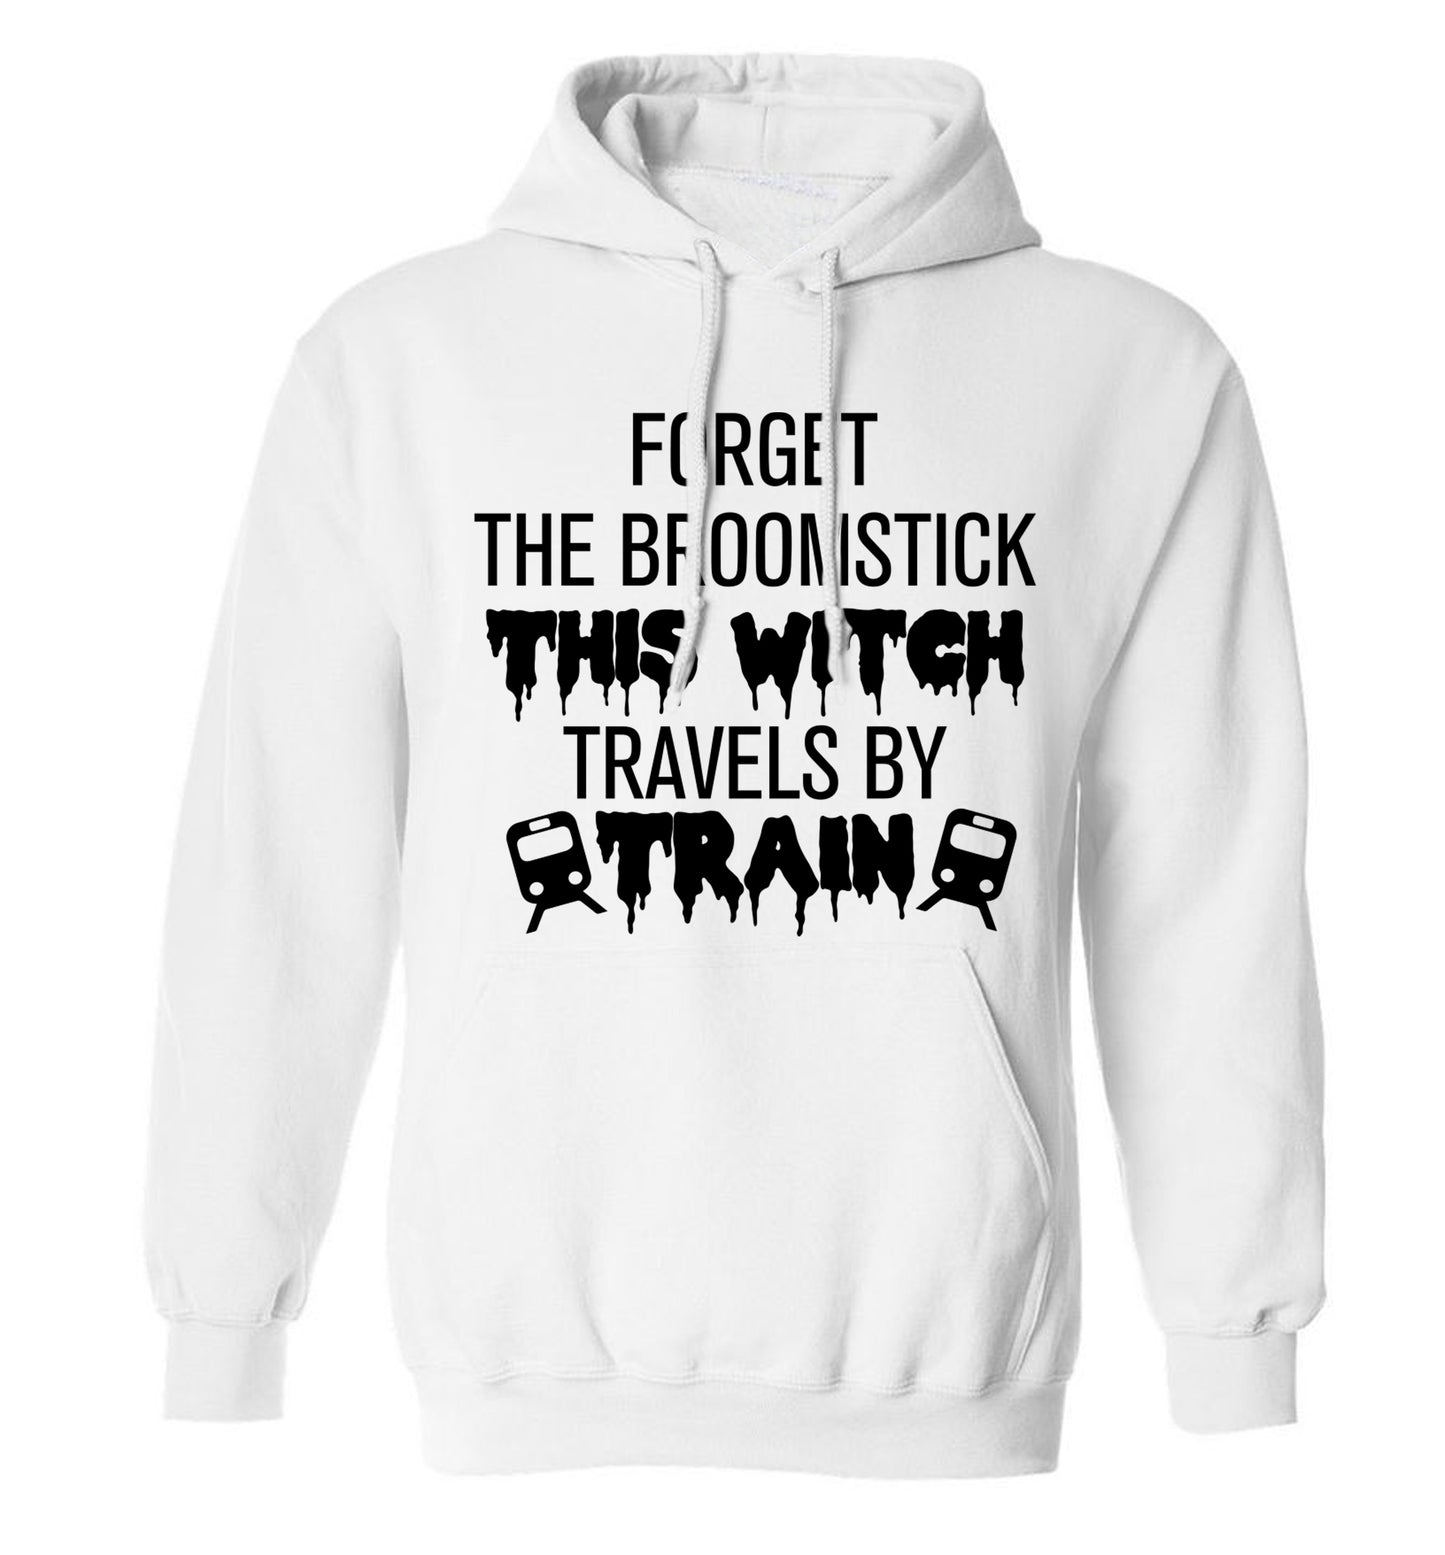 Forget the broomstick this witch travels by train adults unisexwhite hoodie 2XL